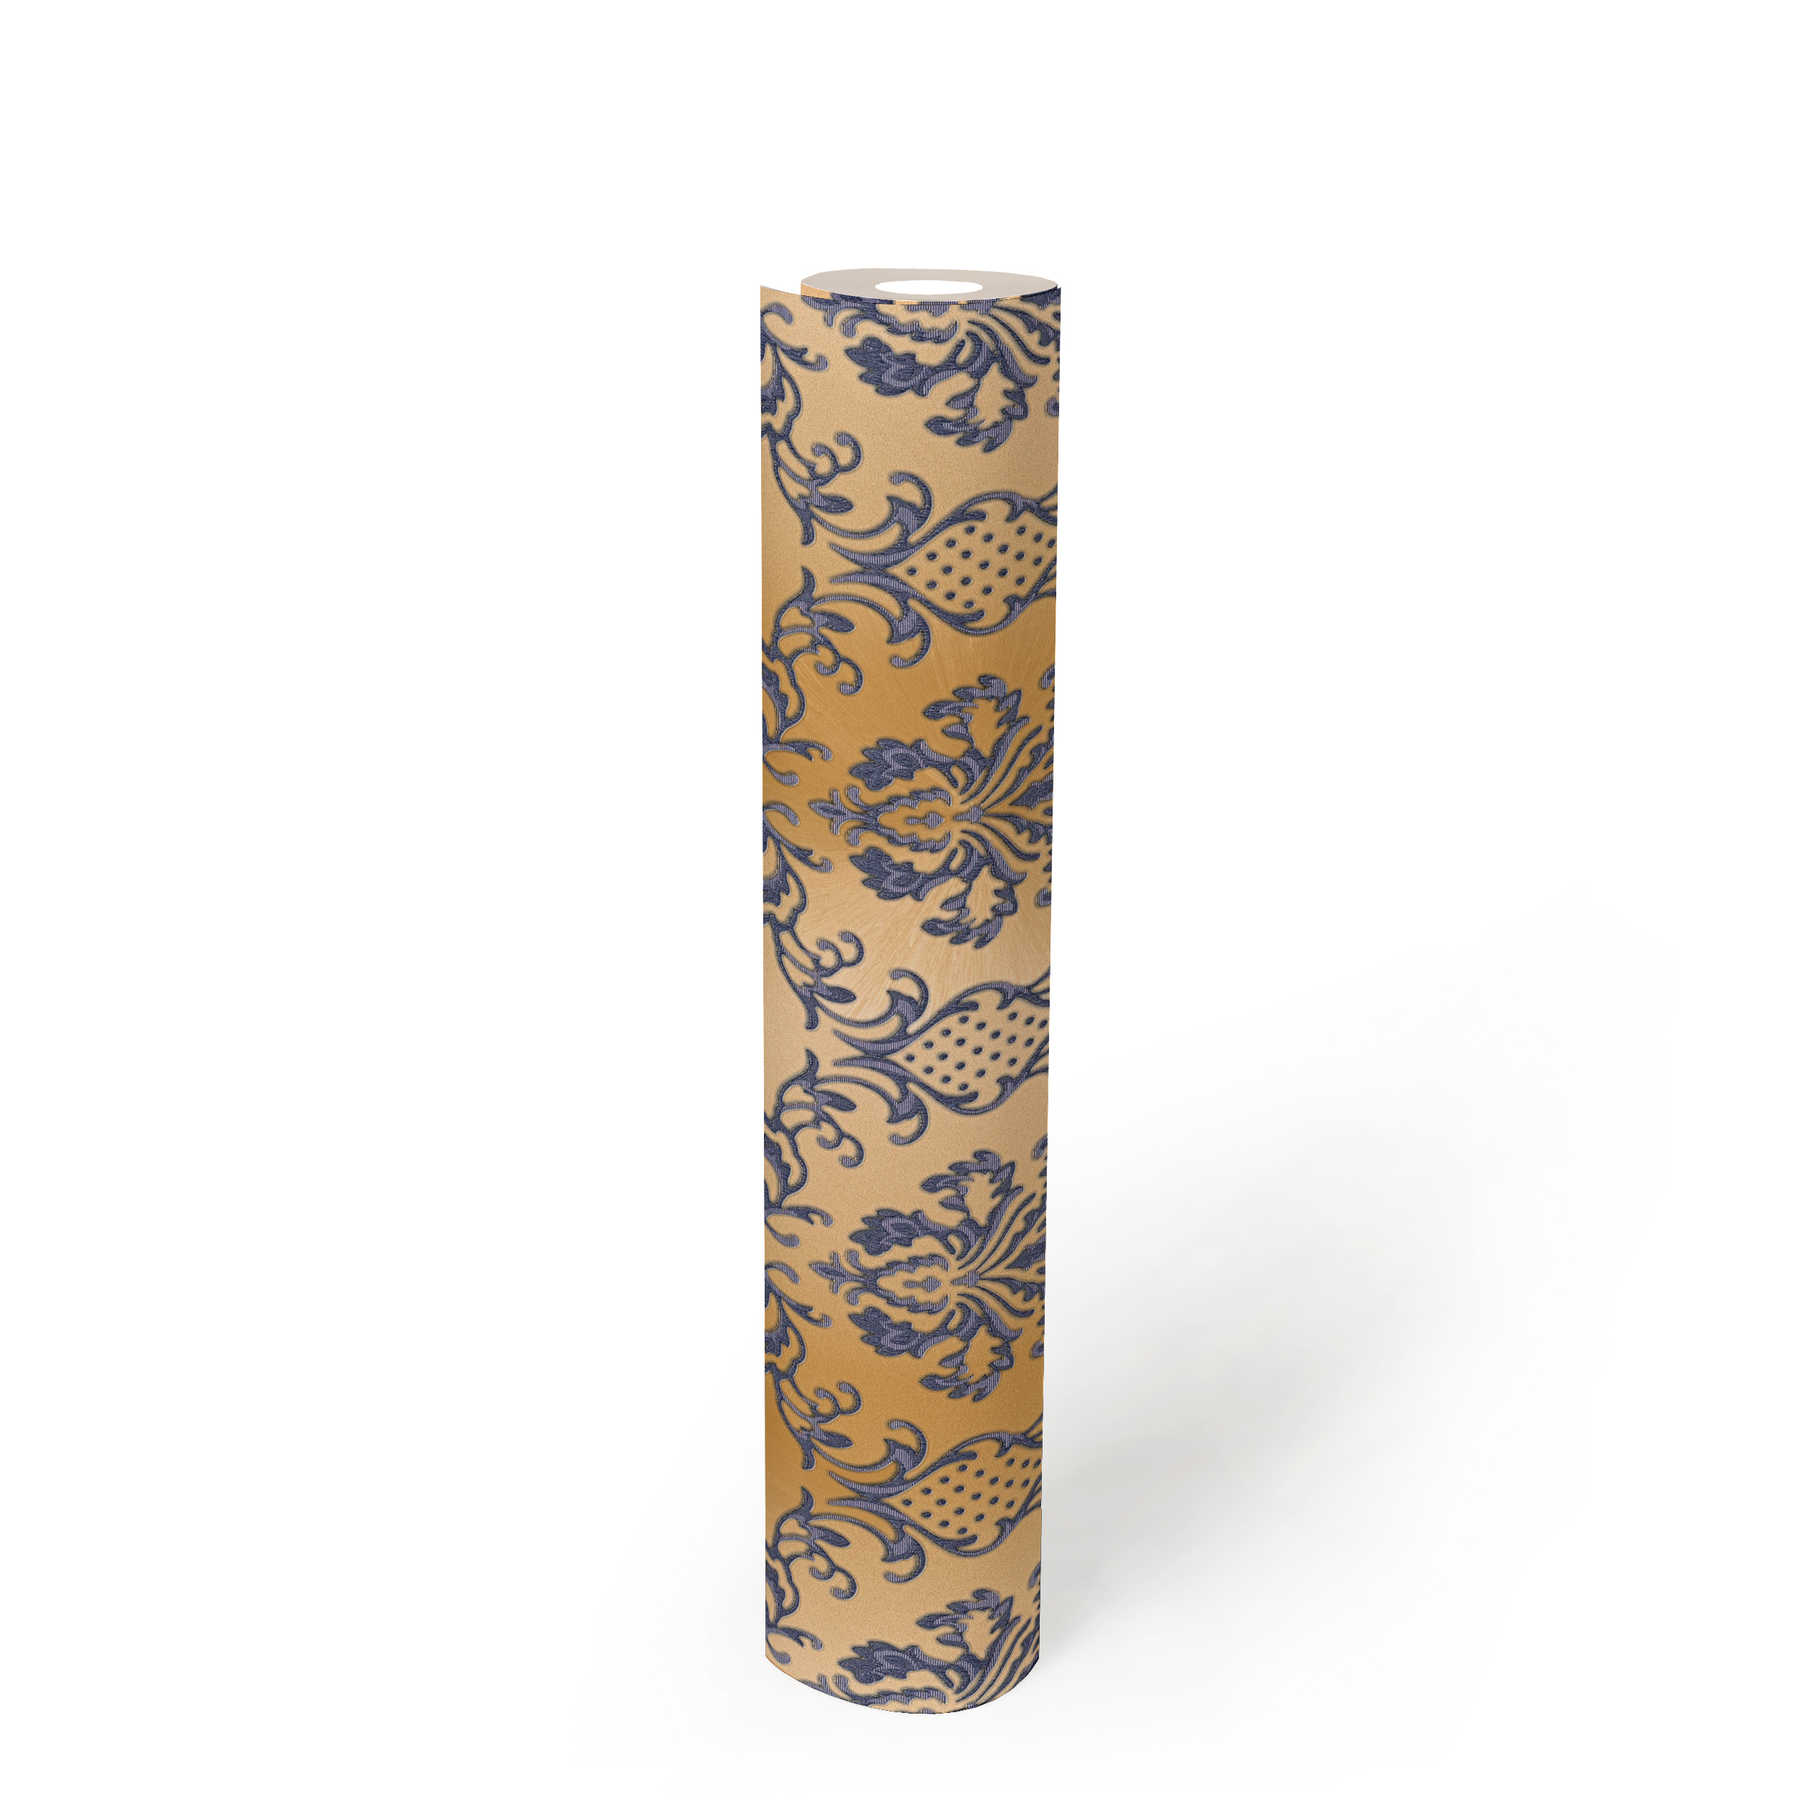             Ornament wallpaper with metallic effect - blue, brown
        